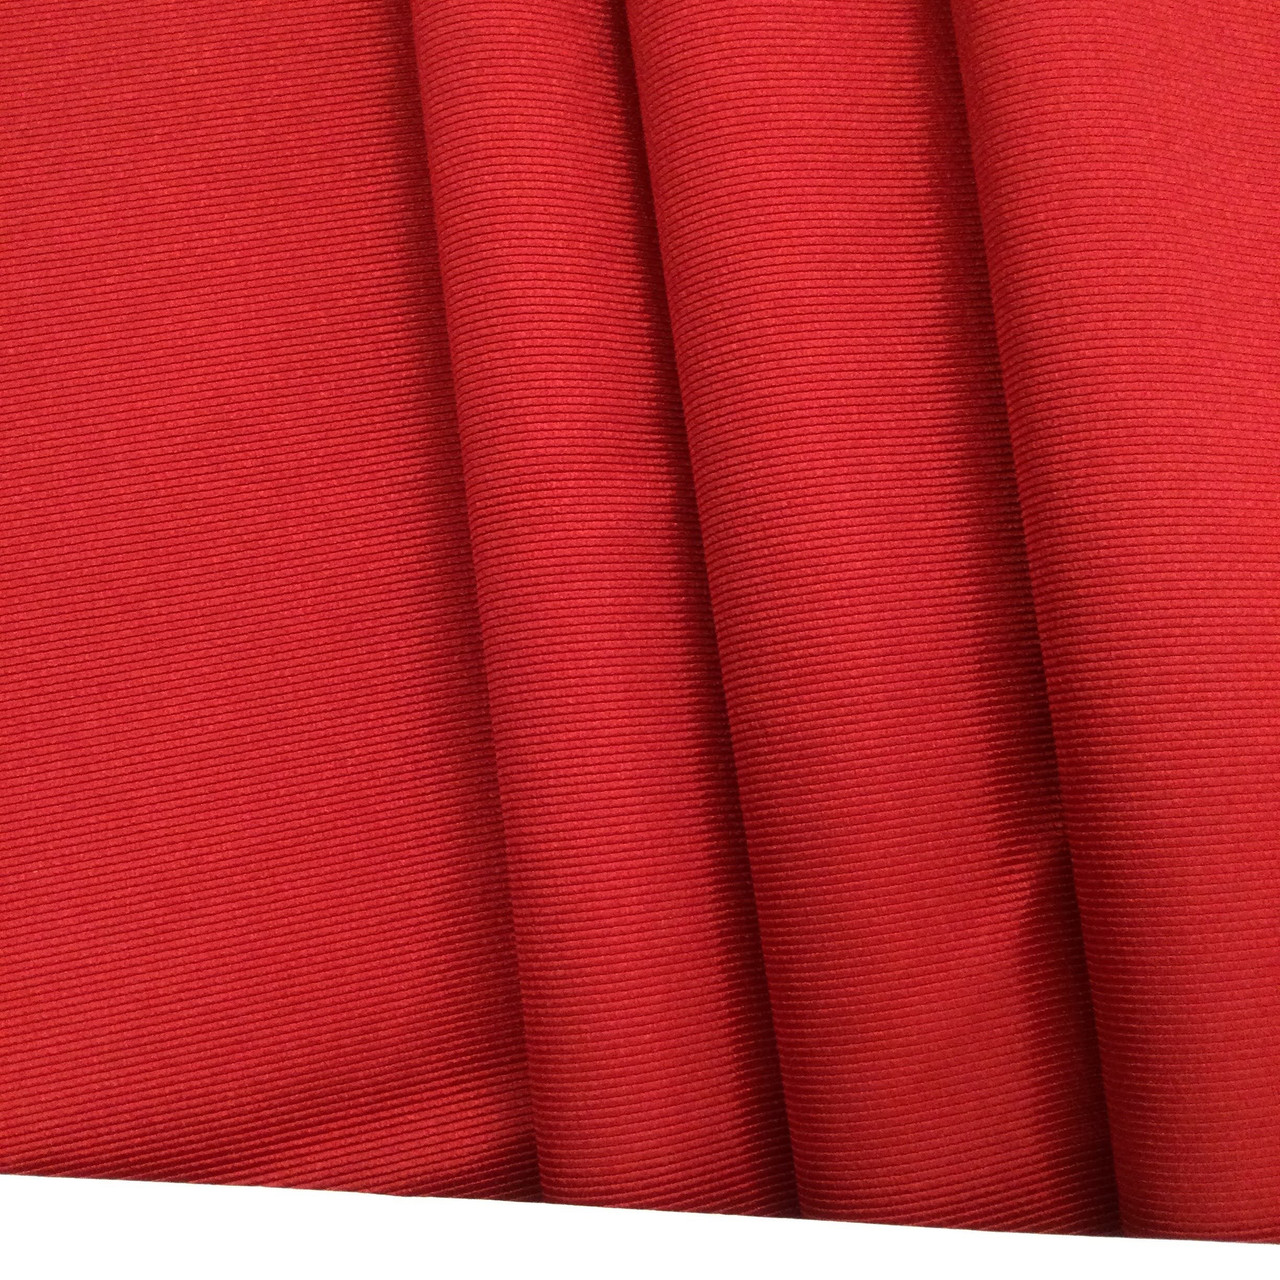 330gsm Red Fleece Fabric, 60% Cotton 40% Polyester